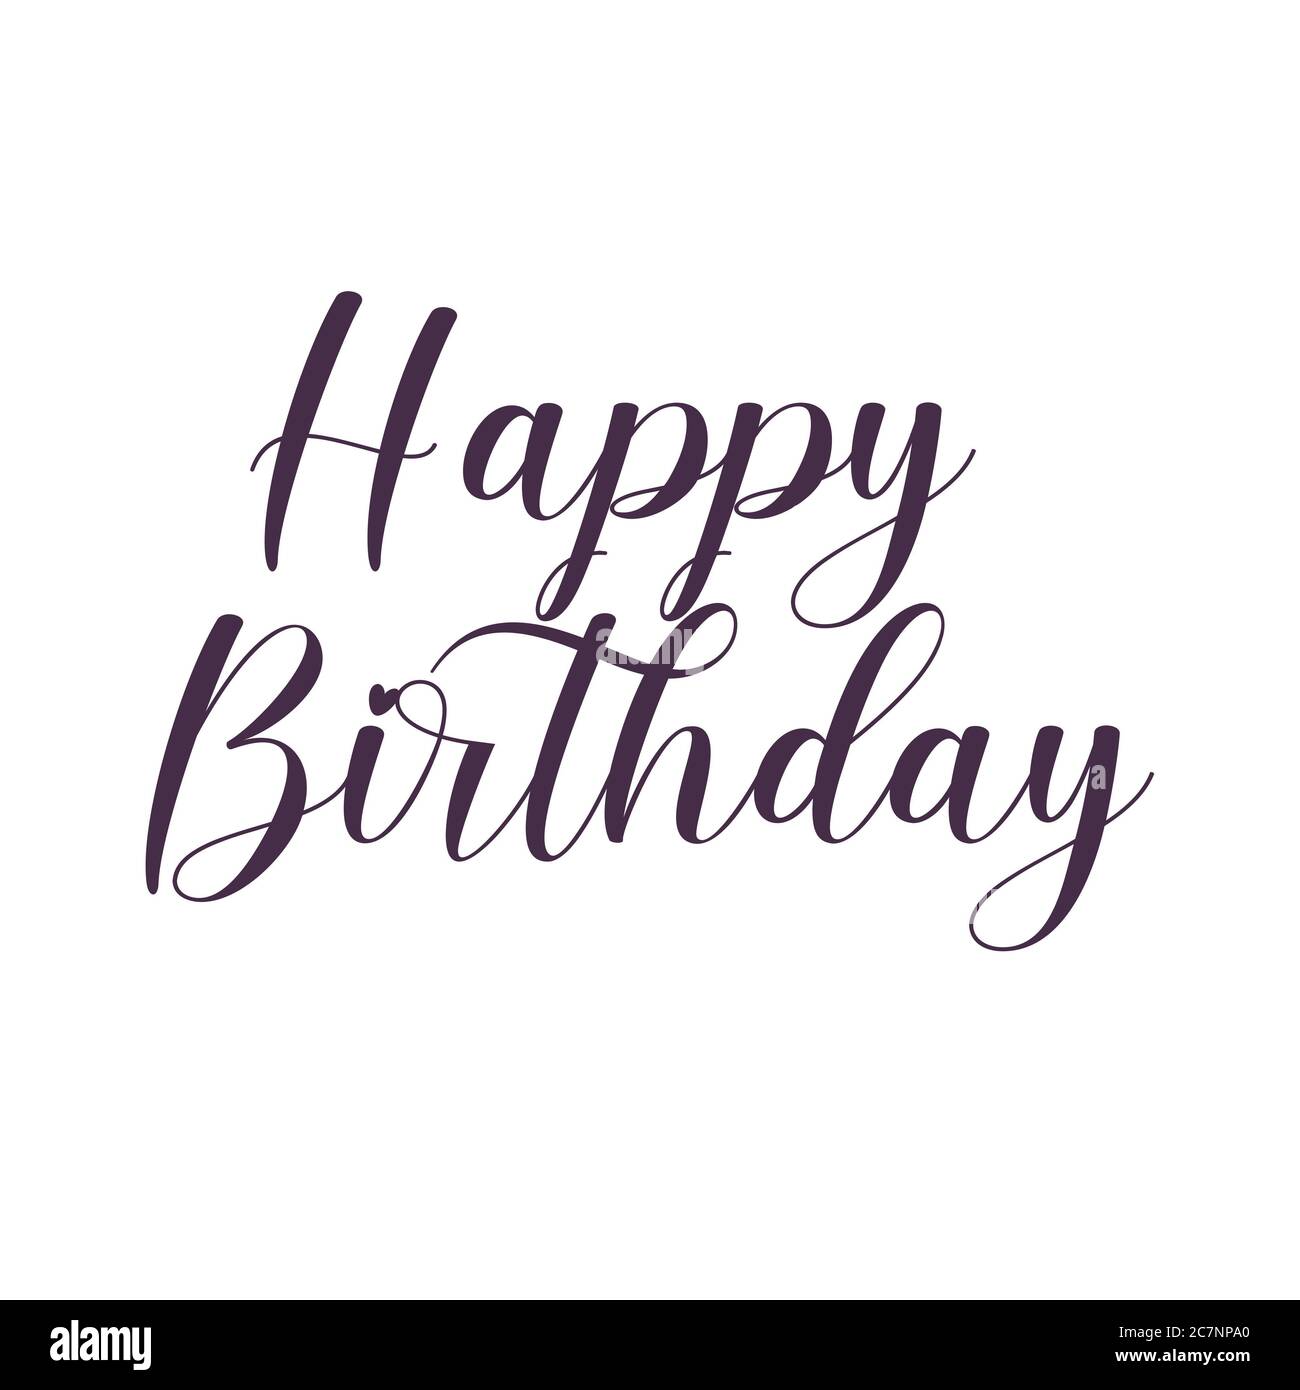 Illustration with the text happy birthday on a white background. Design,  poster, template or background for birthday. Greeting card for celebration.  C Stock Photo - Alamy